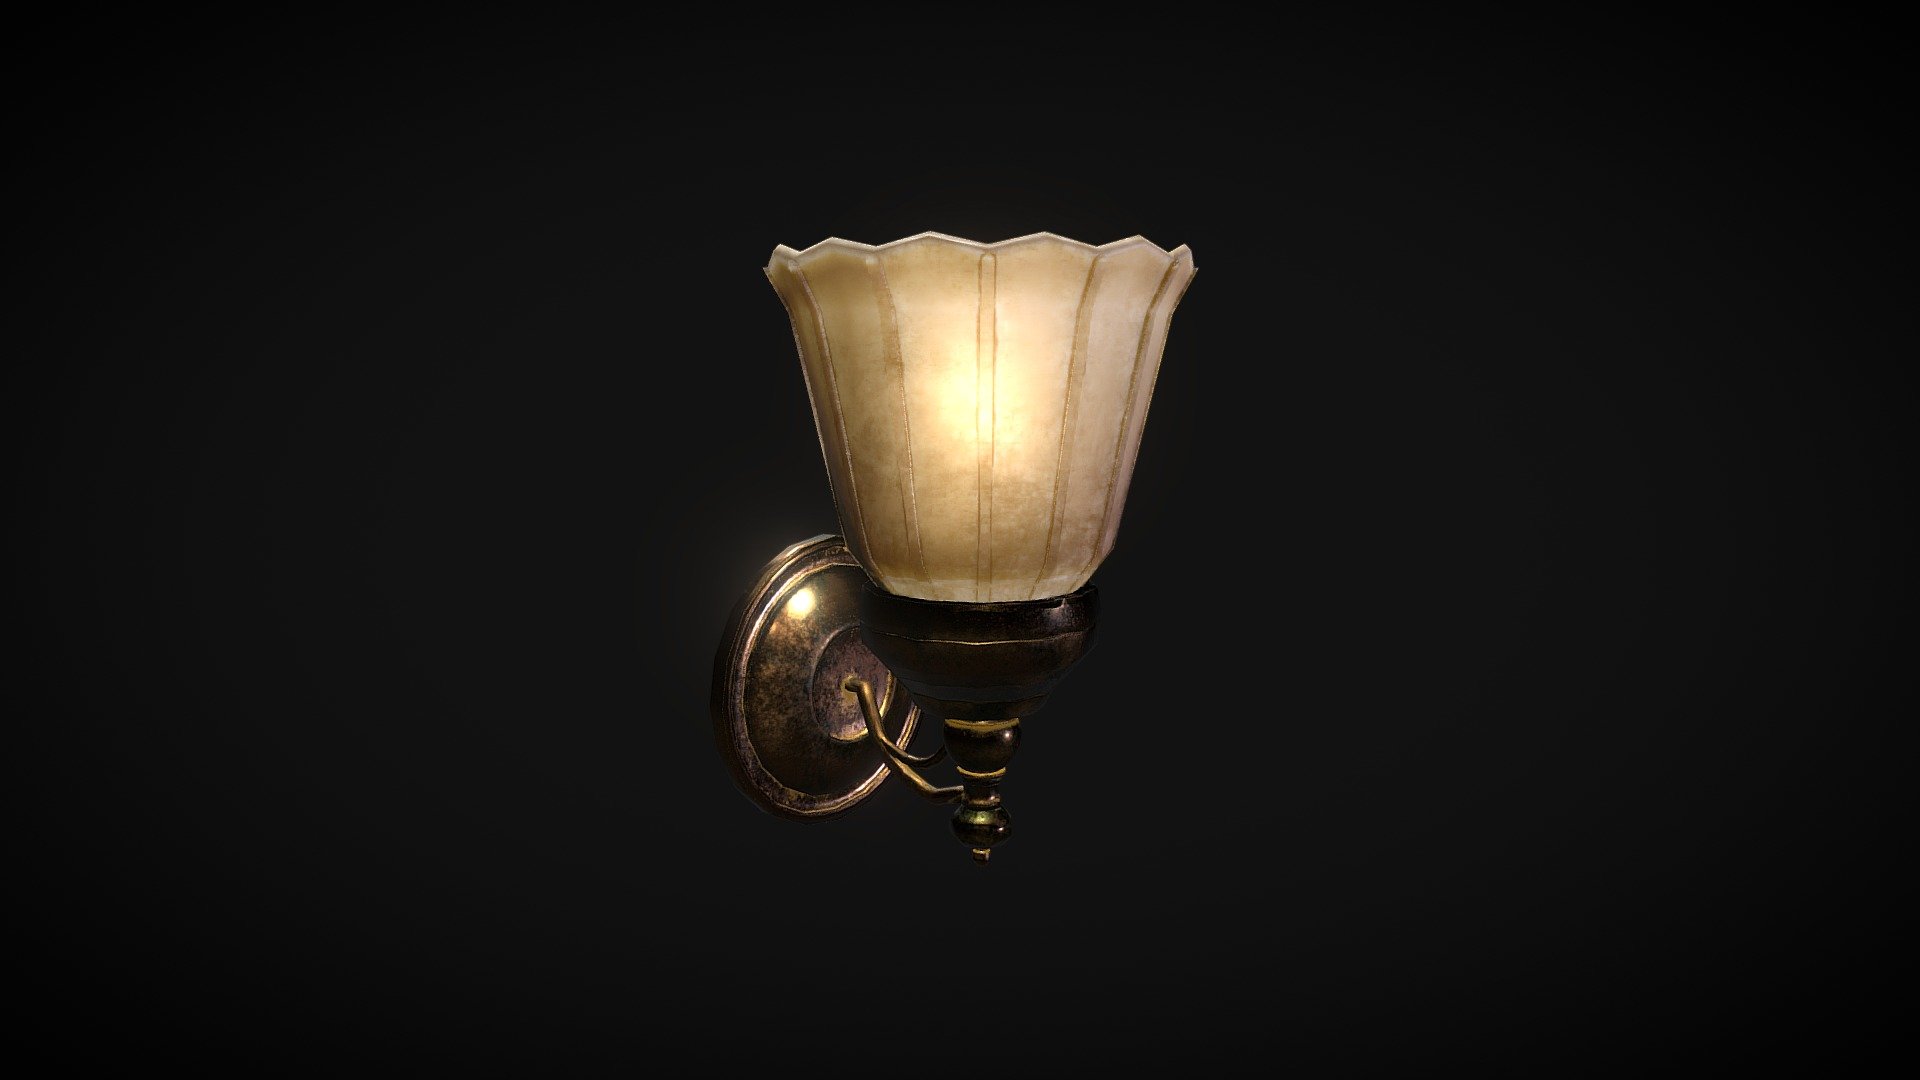 old oblique (wall light), game ready, realstic model.
modeling and UV in MAYA
texturing in substancepainter - Oblique_wall light - 3D model by saraelshenawy 3d model